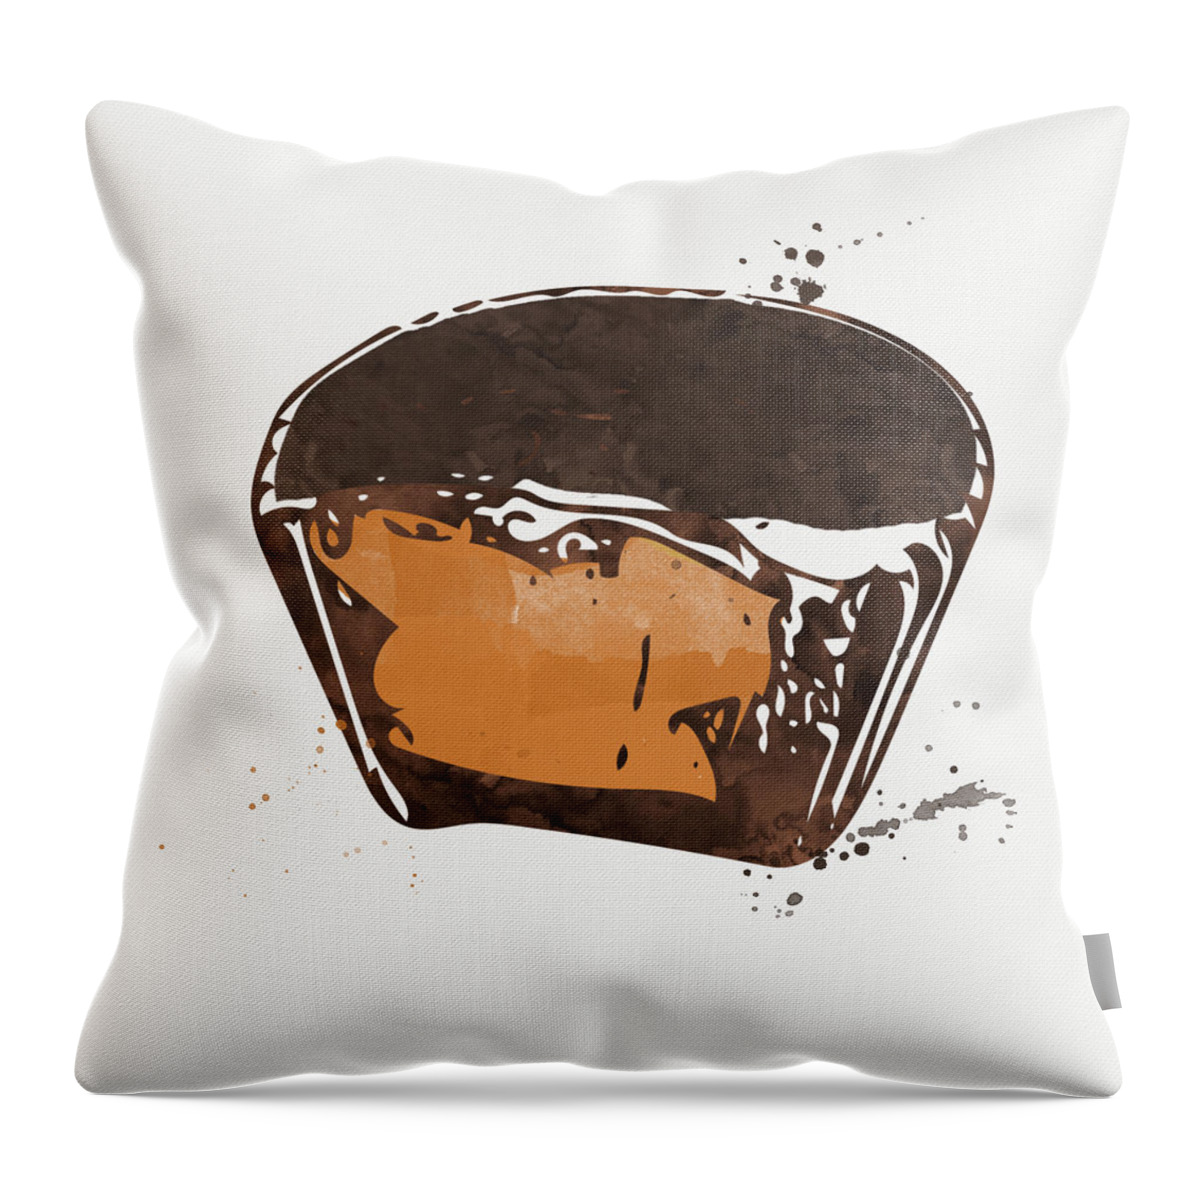 Chocolate Throw Pillow featuring the painting Peanut Butter Cup by Linda Woods